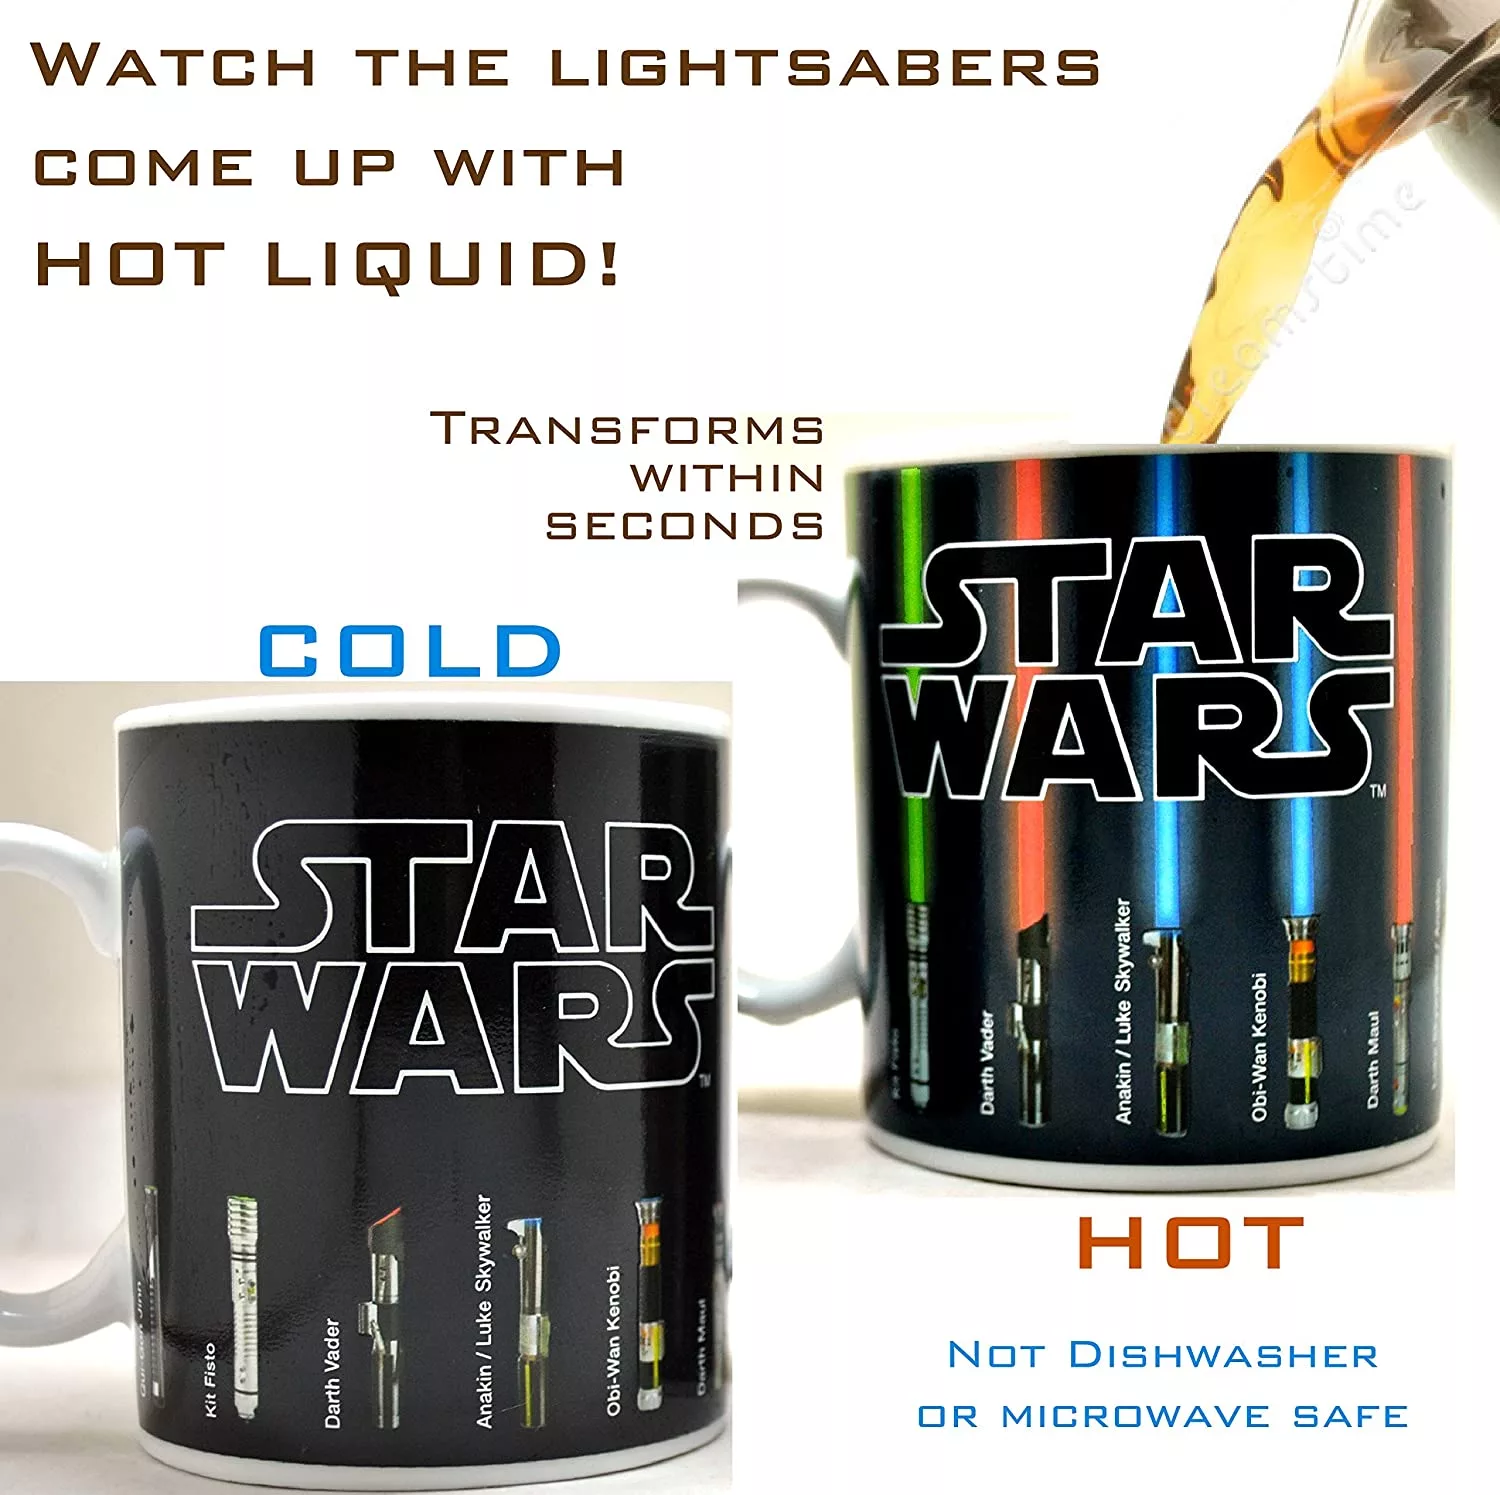 Star Wars Light Sabers Heat Changing Mug Watch the lightsabers come up with hot liquid